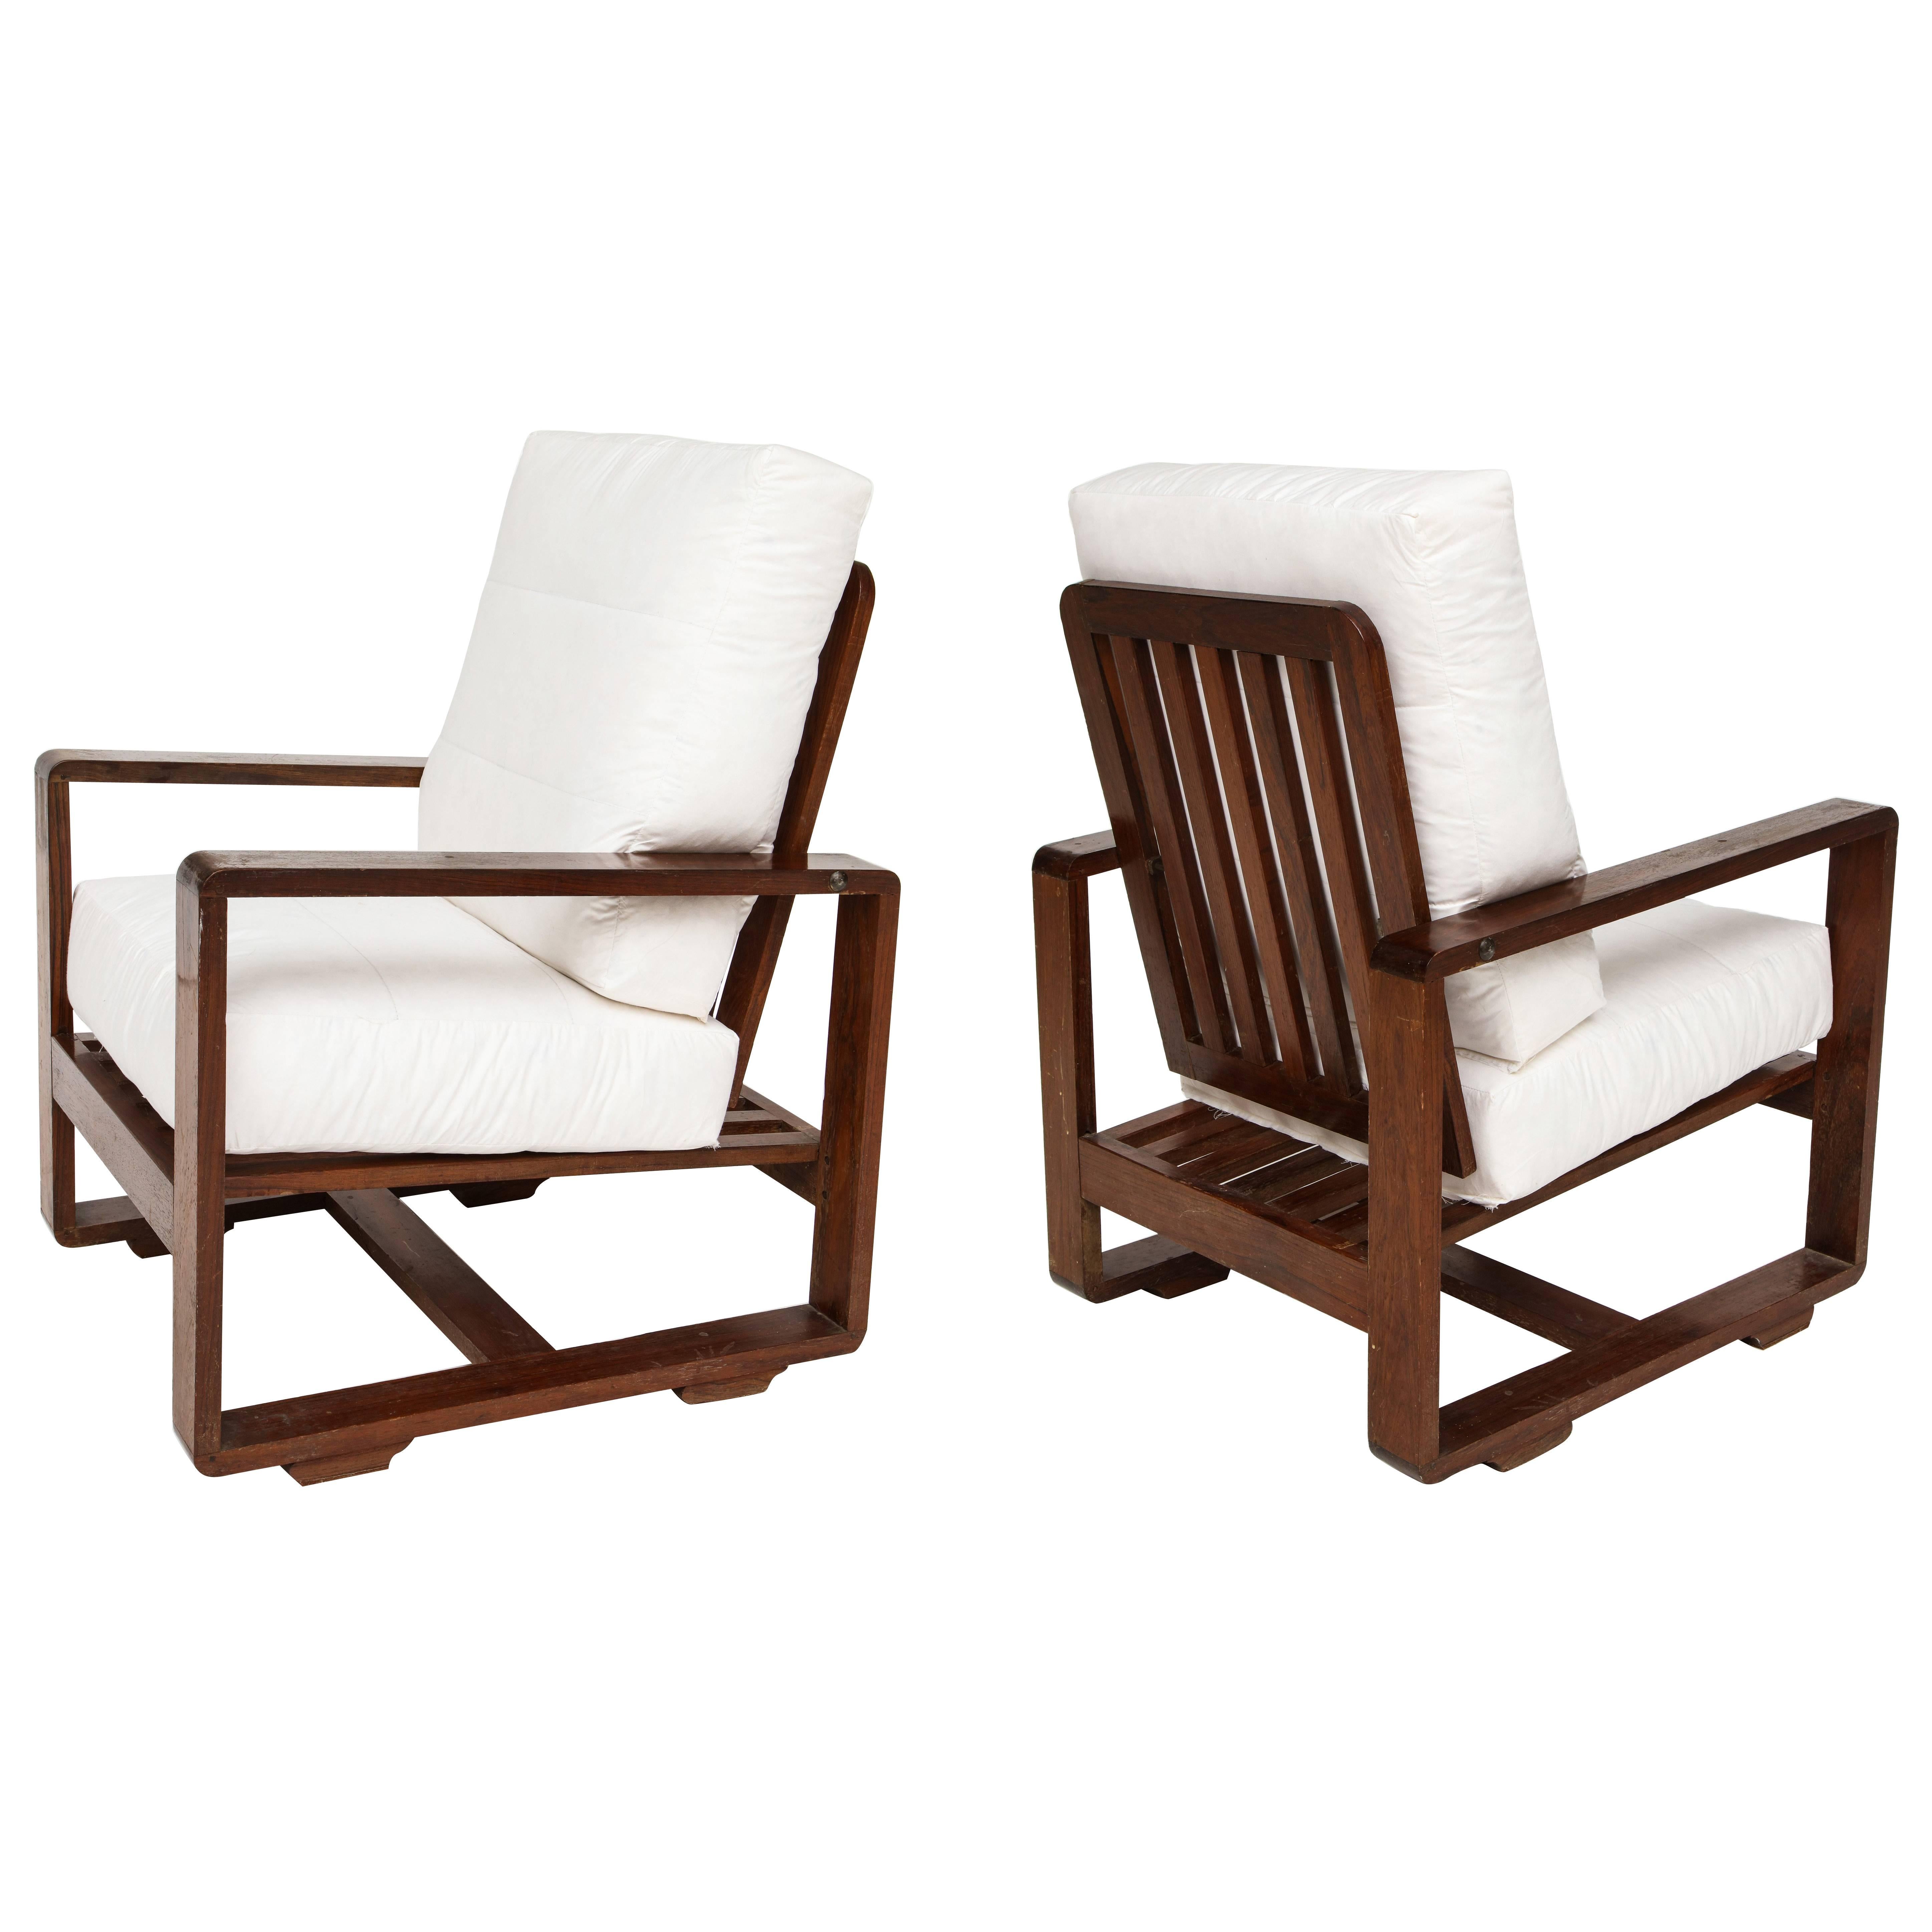 Sornay Style Deco Rosewood Lounge Chairs, France 1930-1940 Mid-Century Modernist